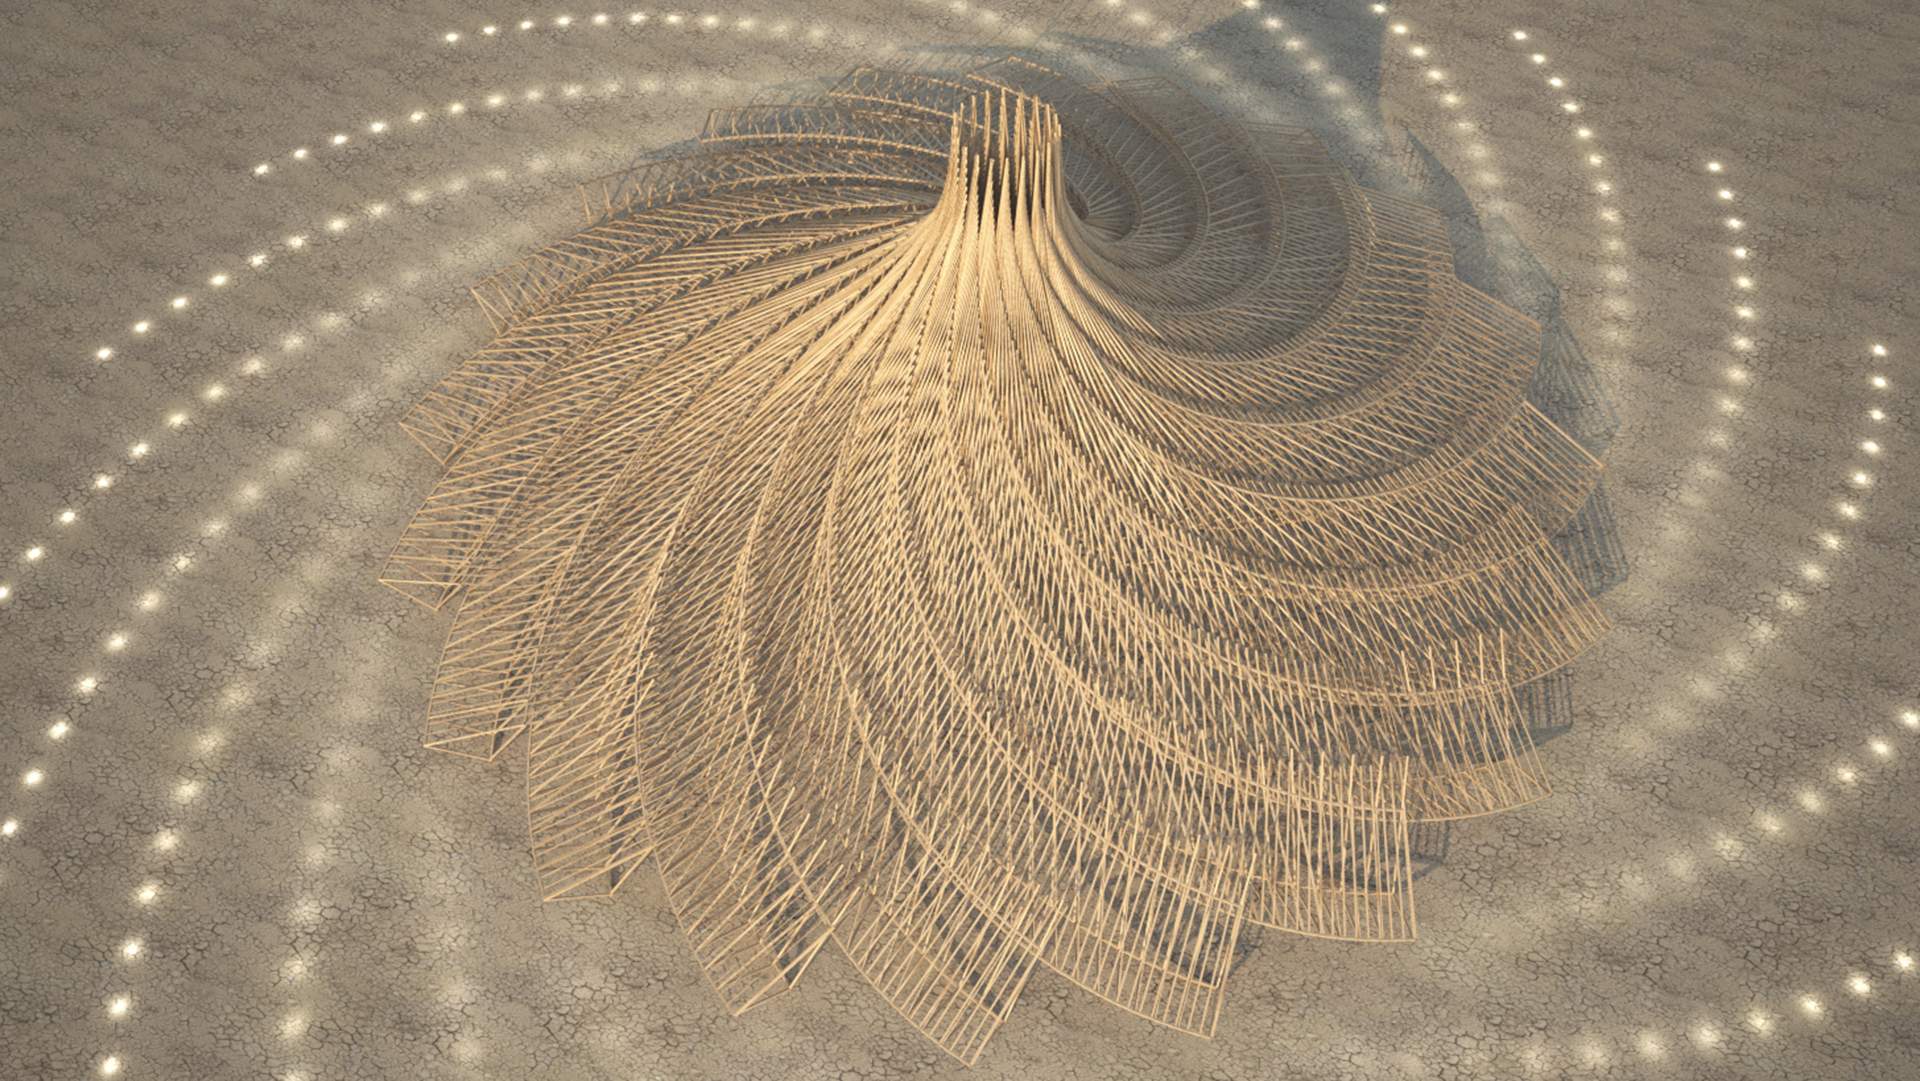 This Swirling Design Has Been Chosen as Burning Man's 2018 Temple